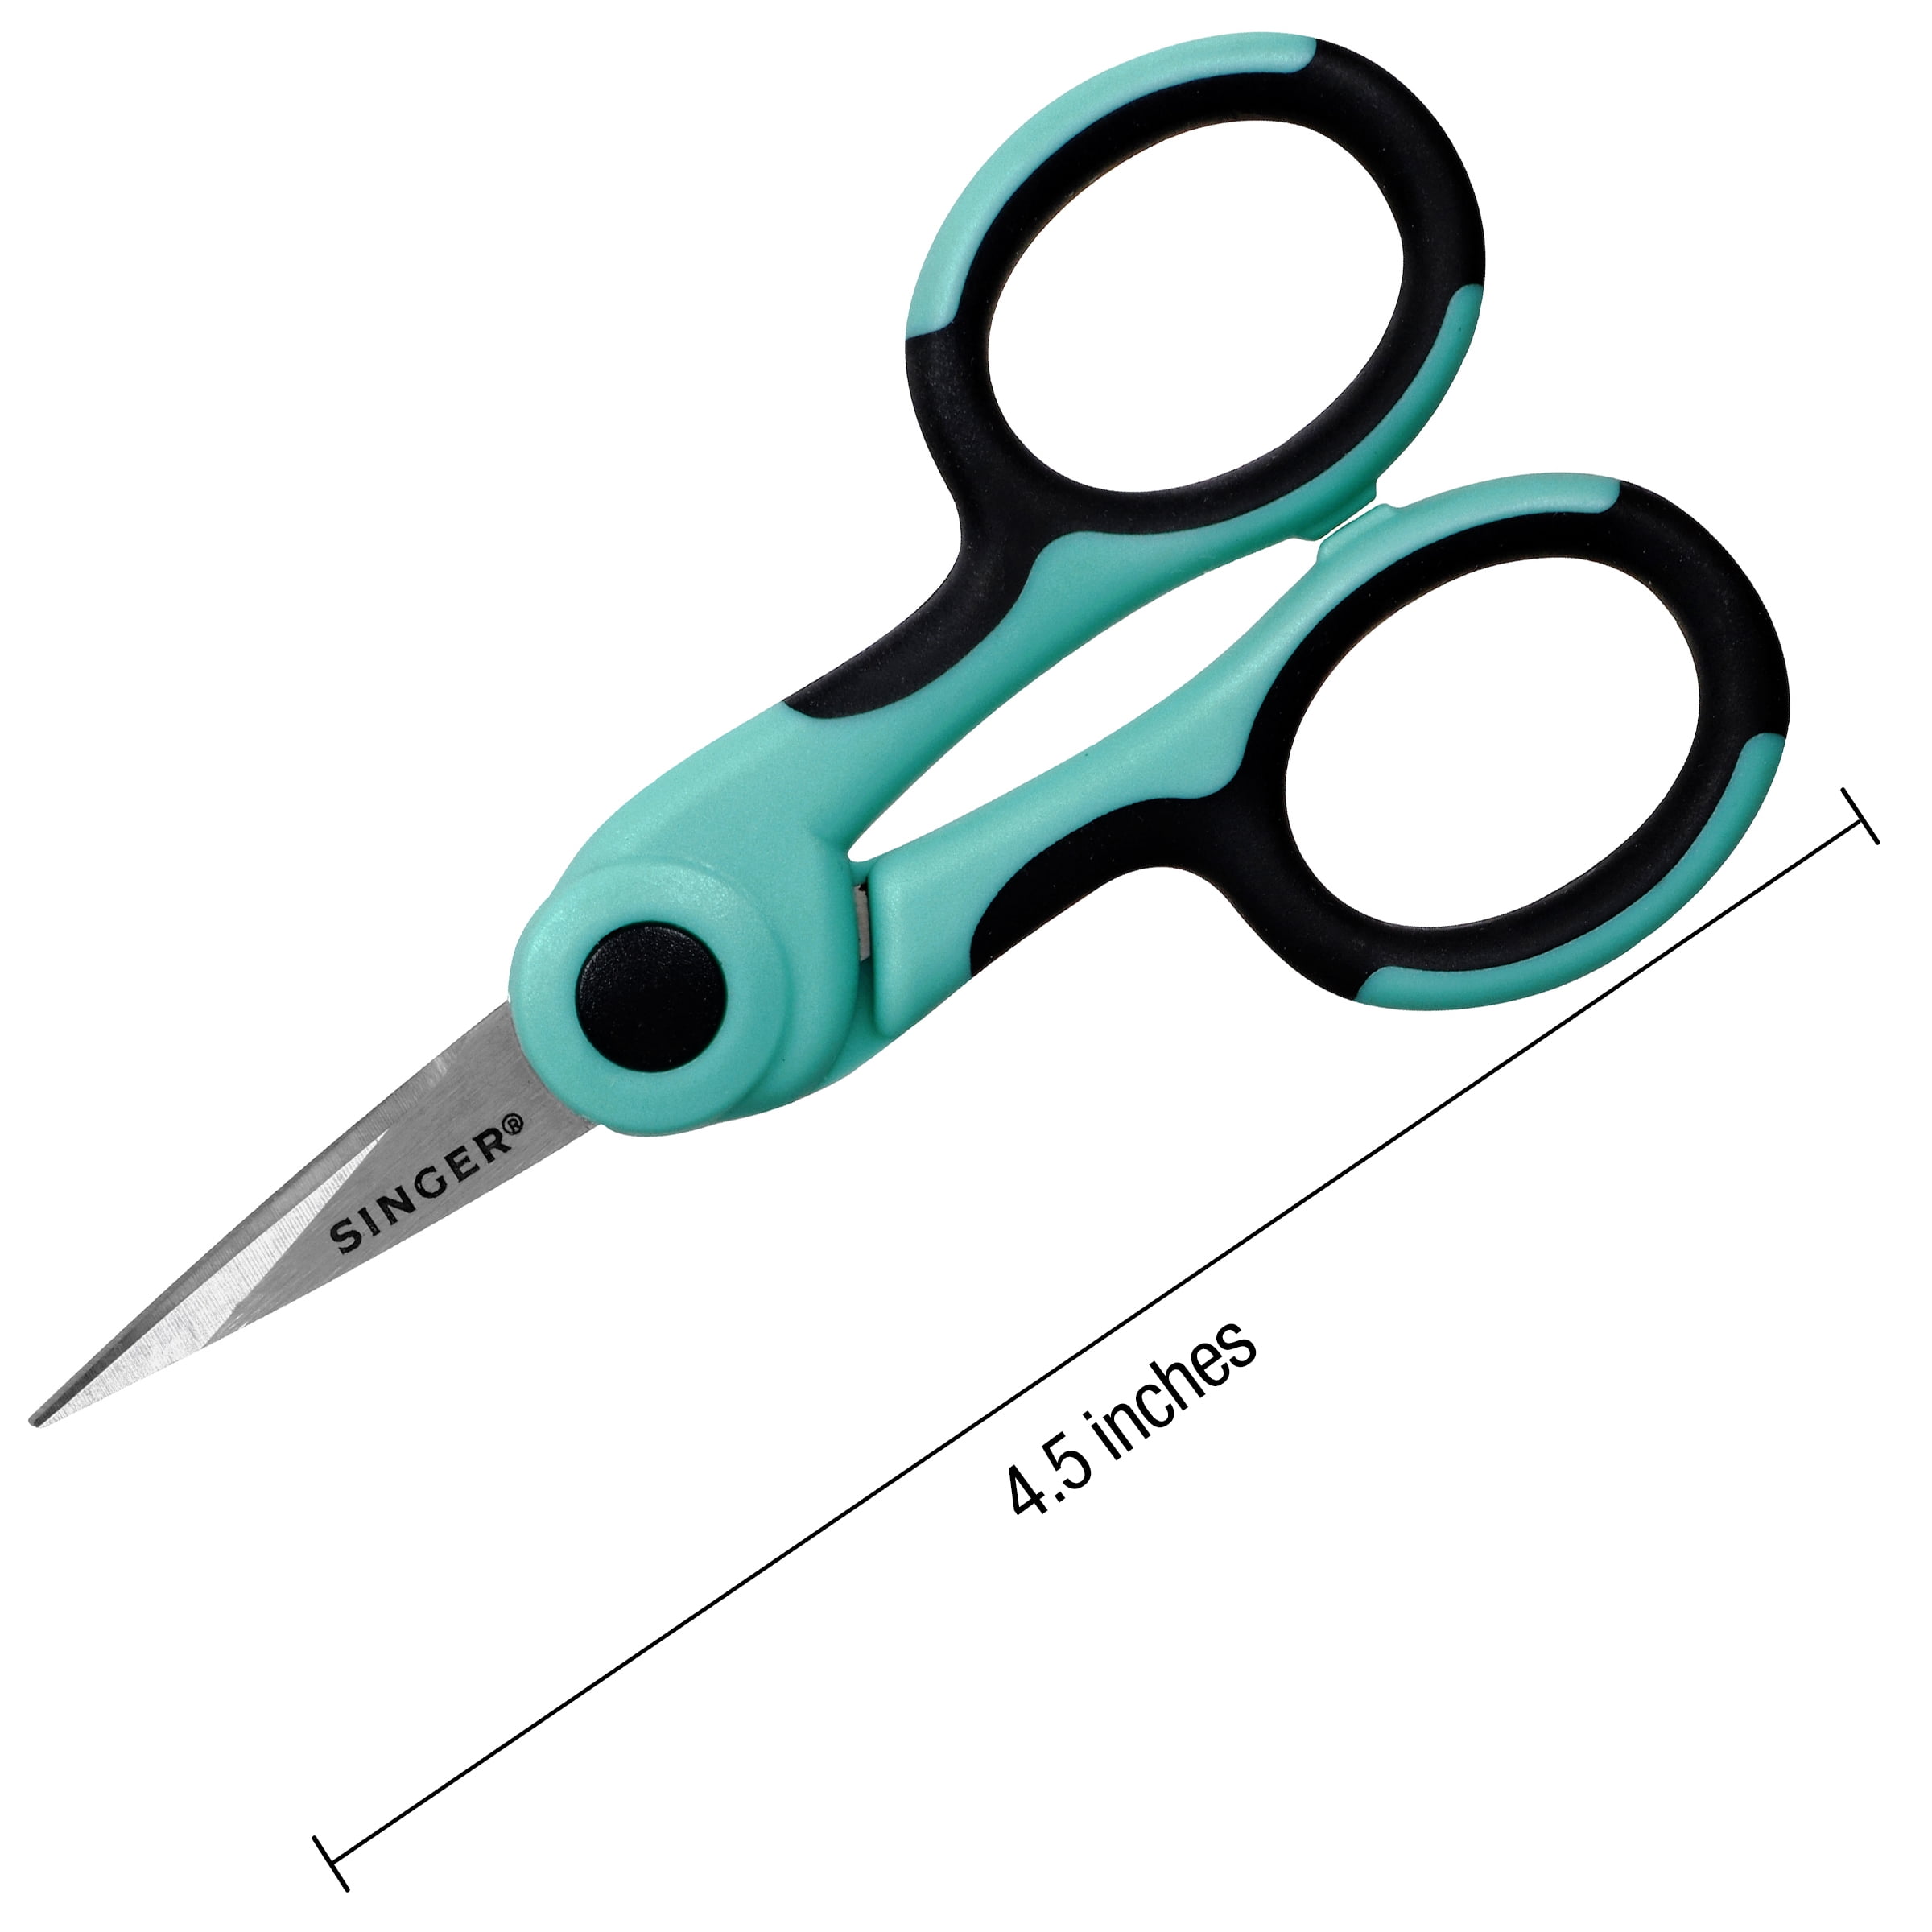 Singer ProSeries Cutting Tool Set with Sewing Scissors, Detail Scissors, Thread Snips, 45mm Rotary Cutter and 6 Extra Blades